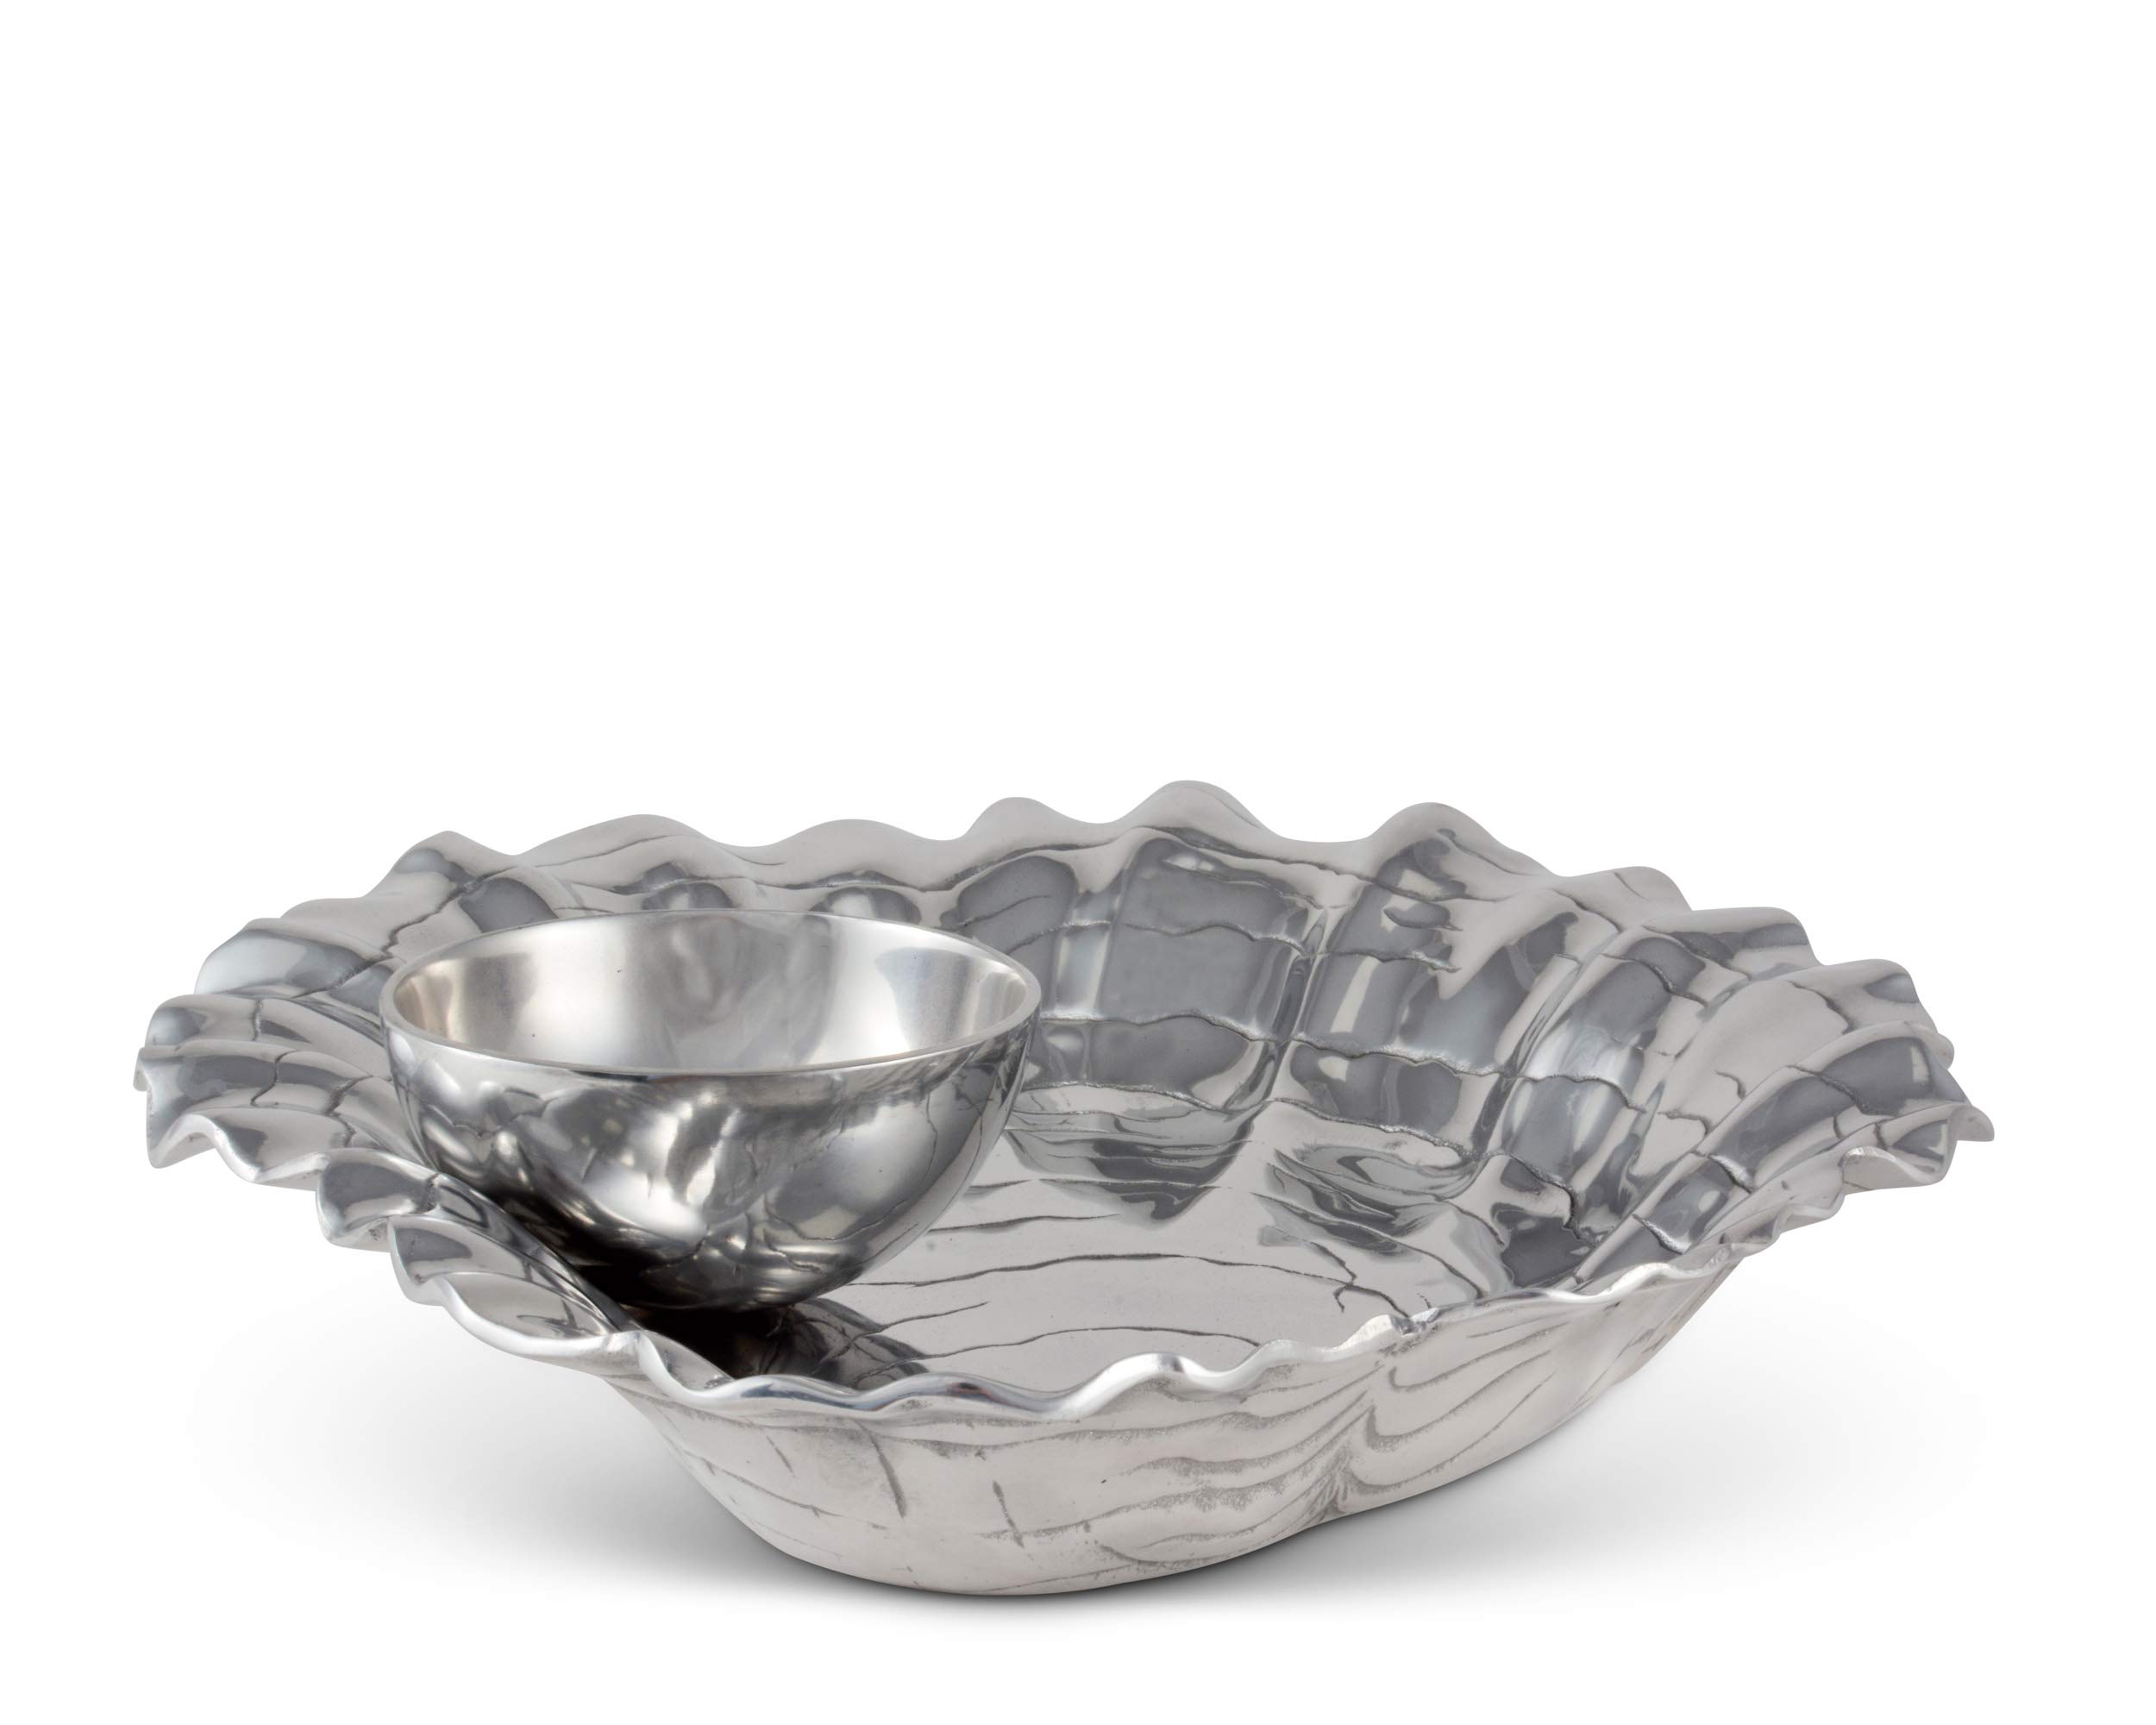 Arthur Court Aluminum Metal Oyster Chip Bowl with Pearl Dip Bowl - Formal and Everyday Coastal décor 15 inch x 13.5 inch